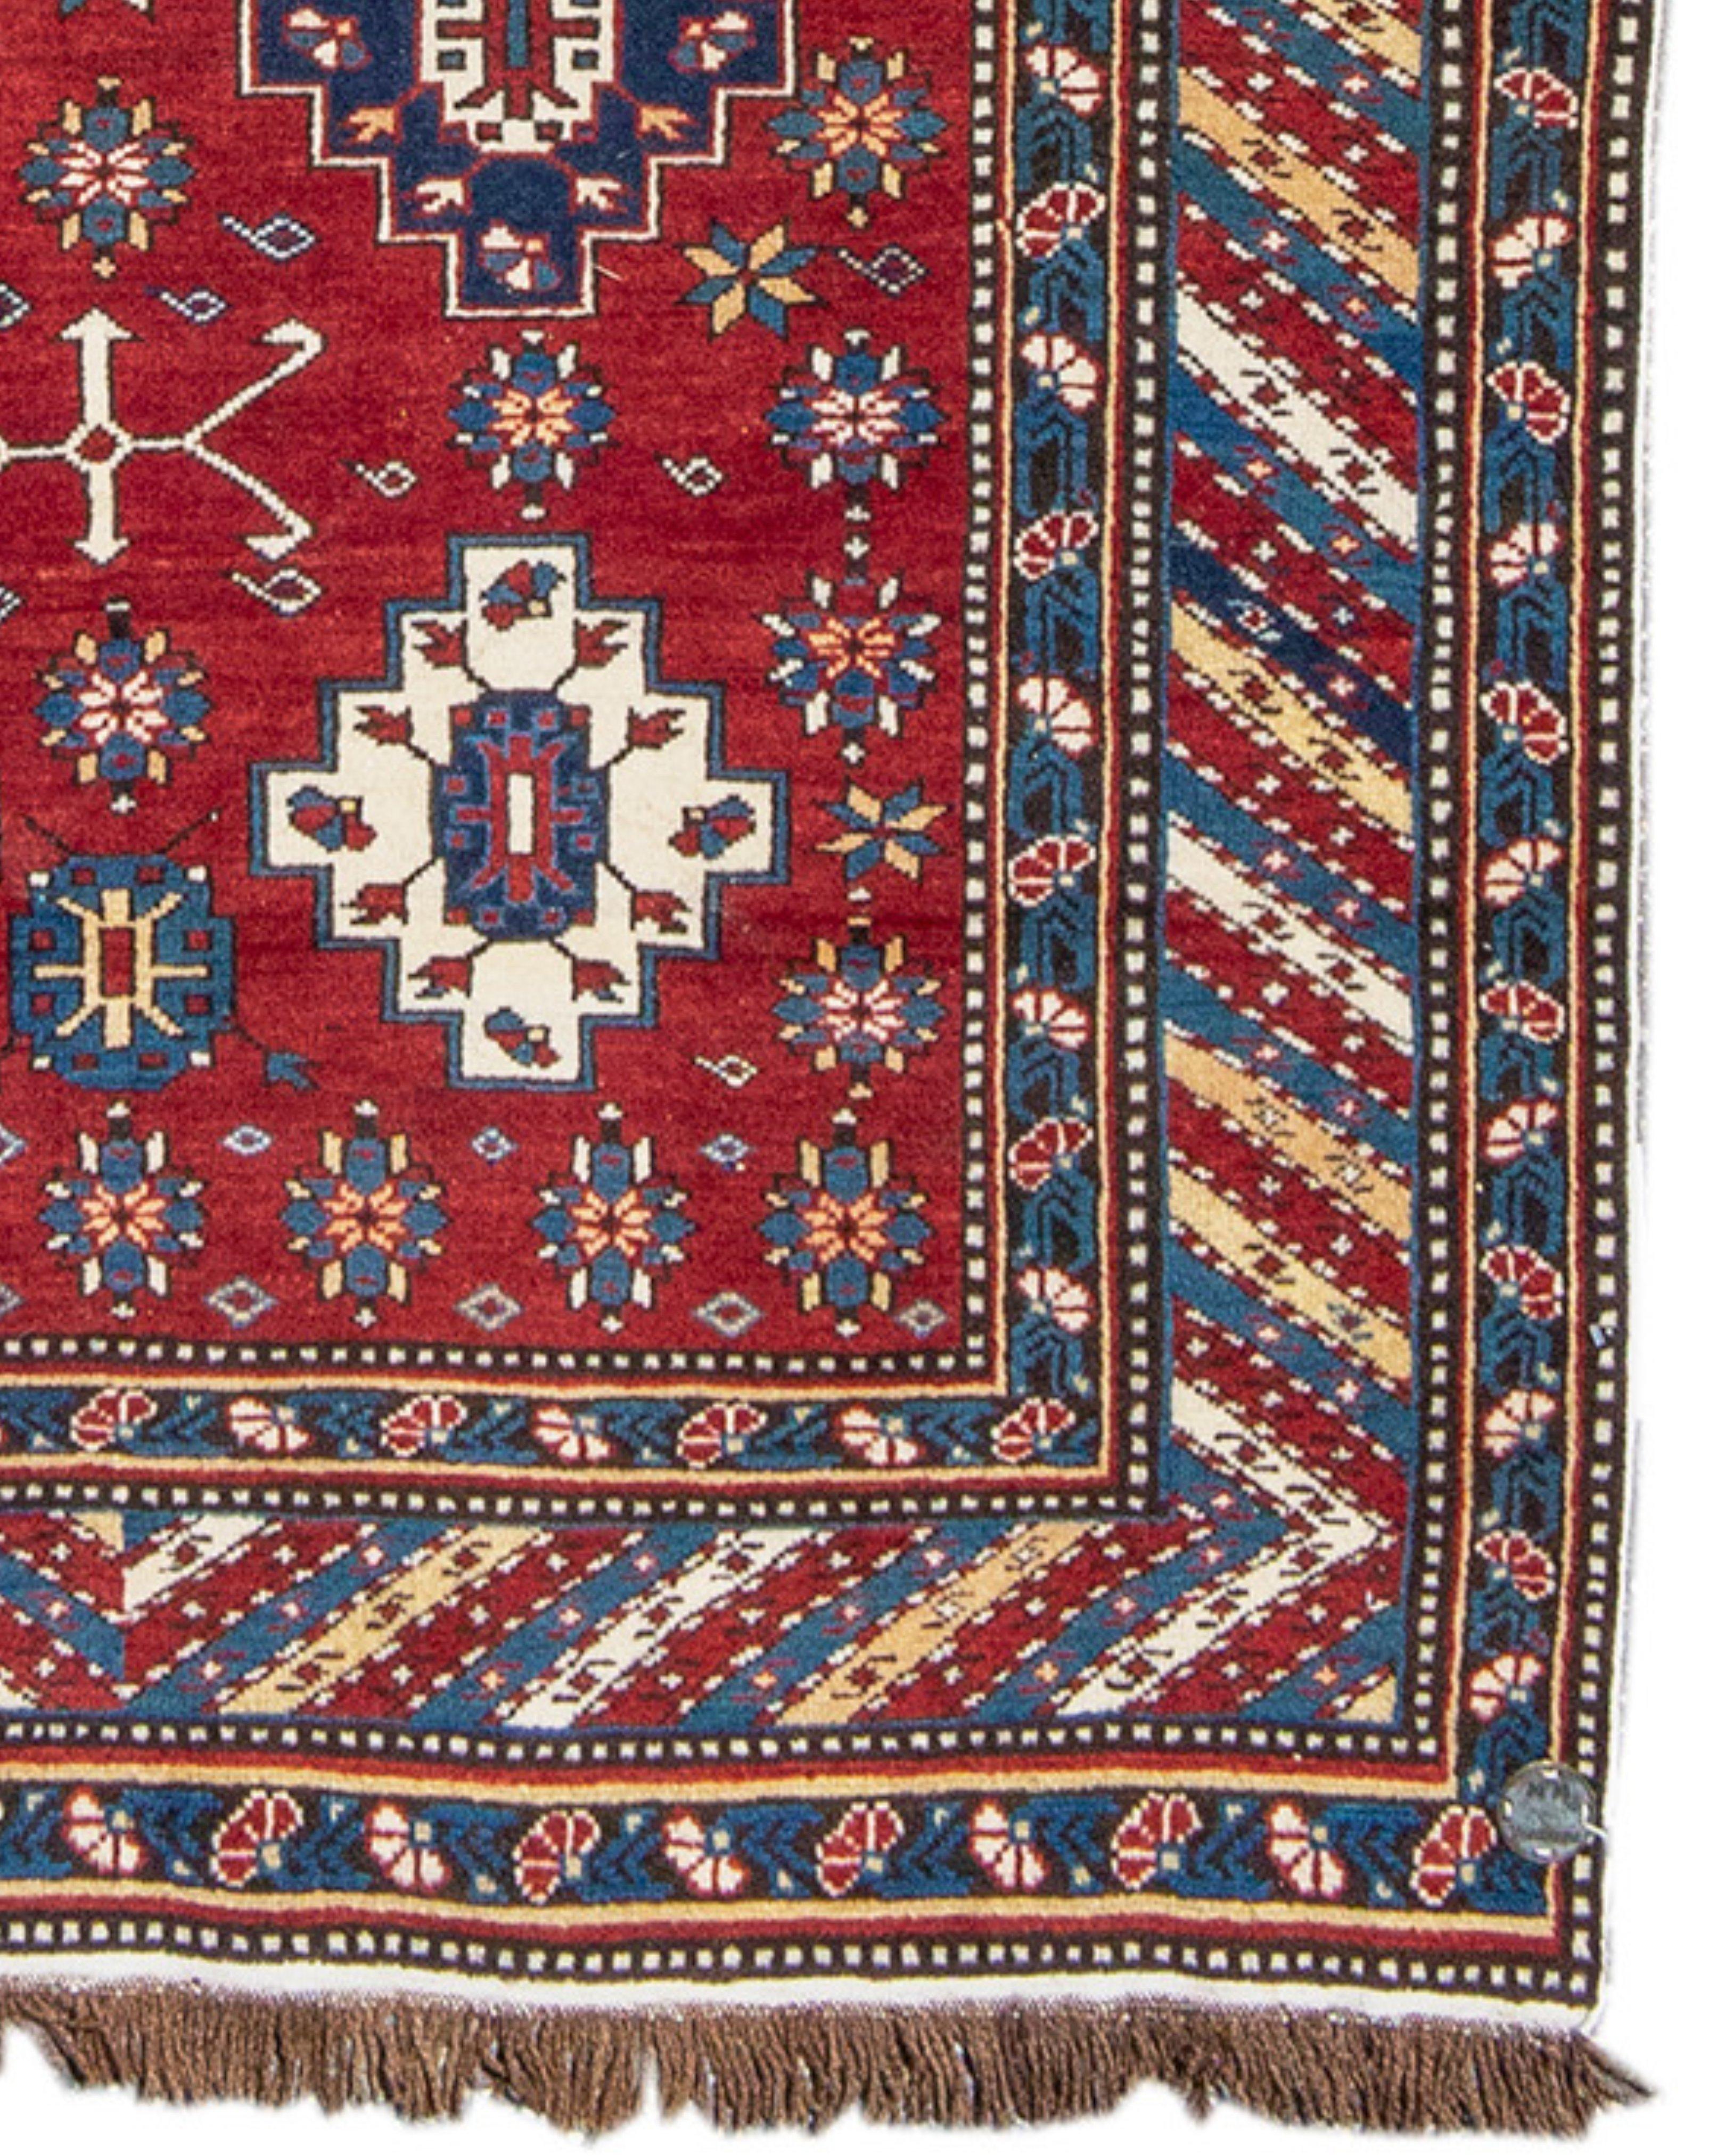 Antique Shirvan Long Rug, Late 19th Century

Once part of the renowned Meyer Müller collection of fine oriental rugs, this is a stellar example of weaving from the Shirvan area of the Caucasus. Often, rugs of this type are seen with a busy, almost